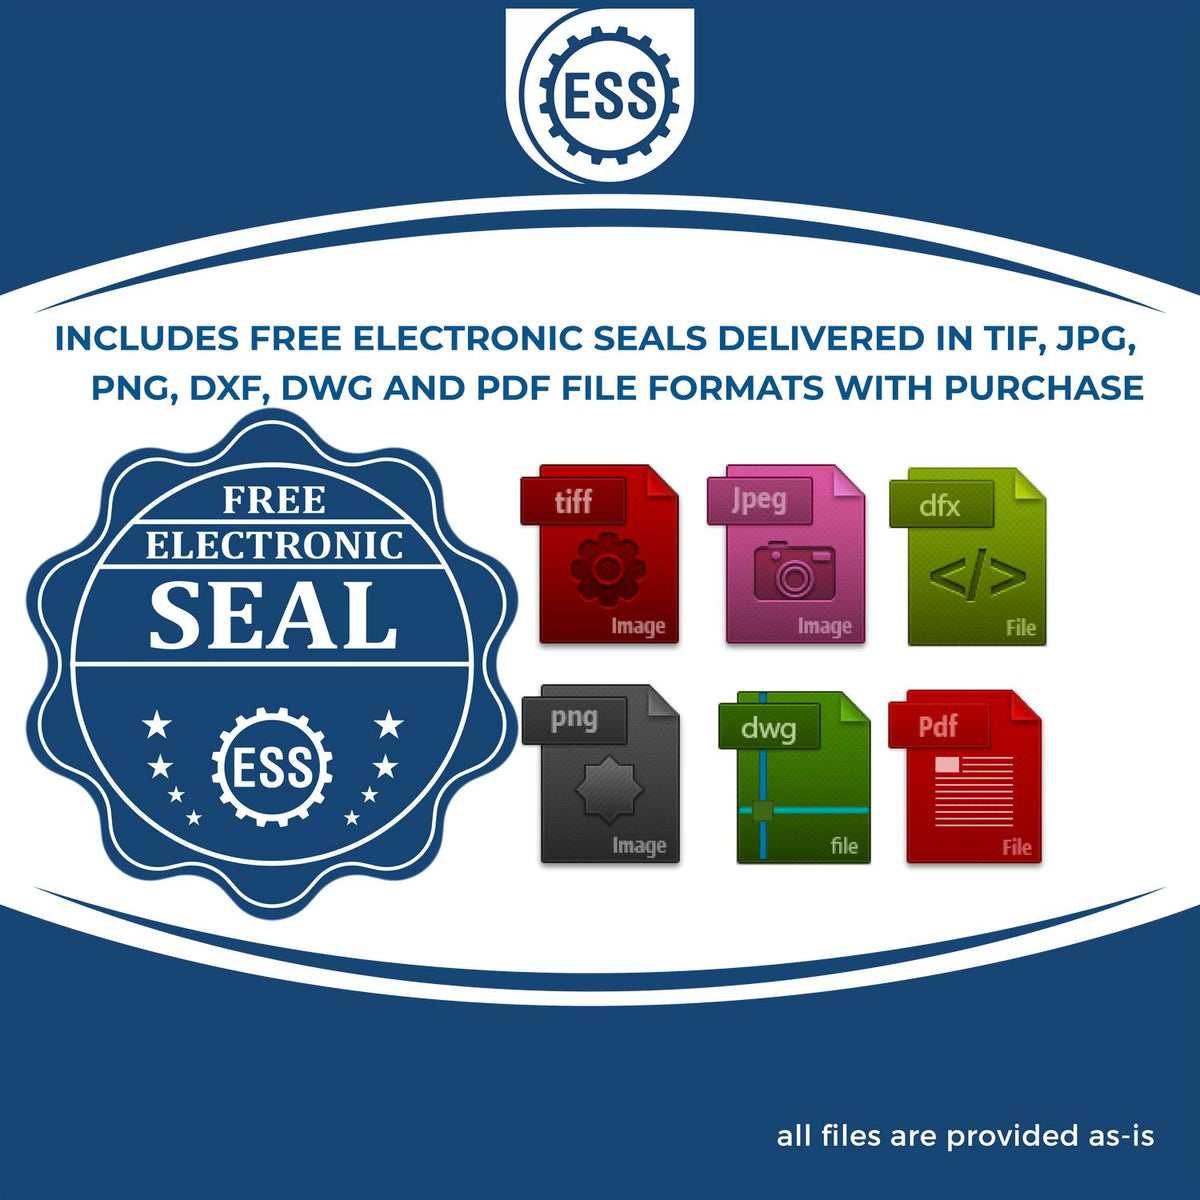 An infographic for the free electronic seal for the Self-Inking Montana PE Stamp illustrating the different file type icons such as DXF, DWG, TIF, JPG and PNG.